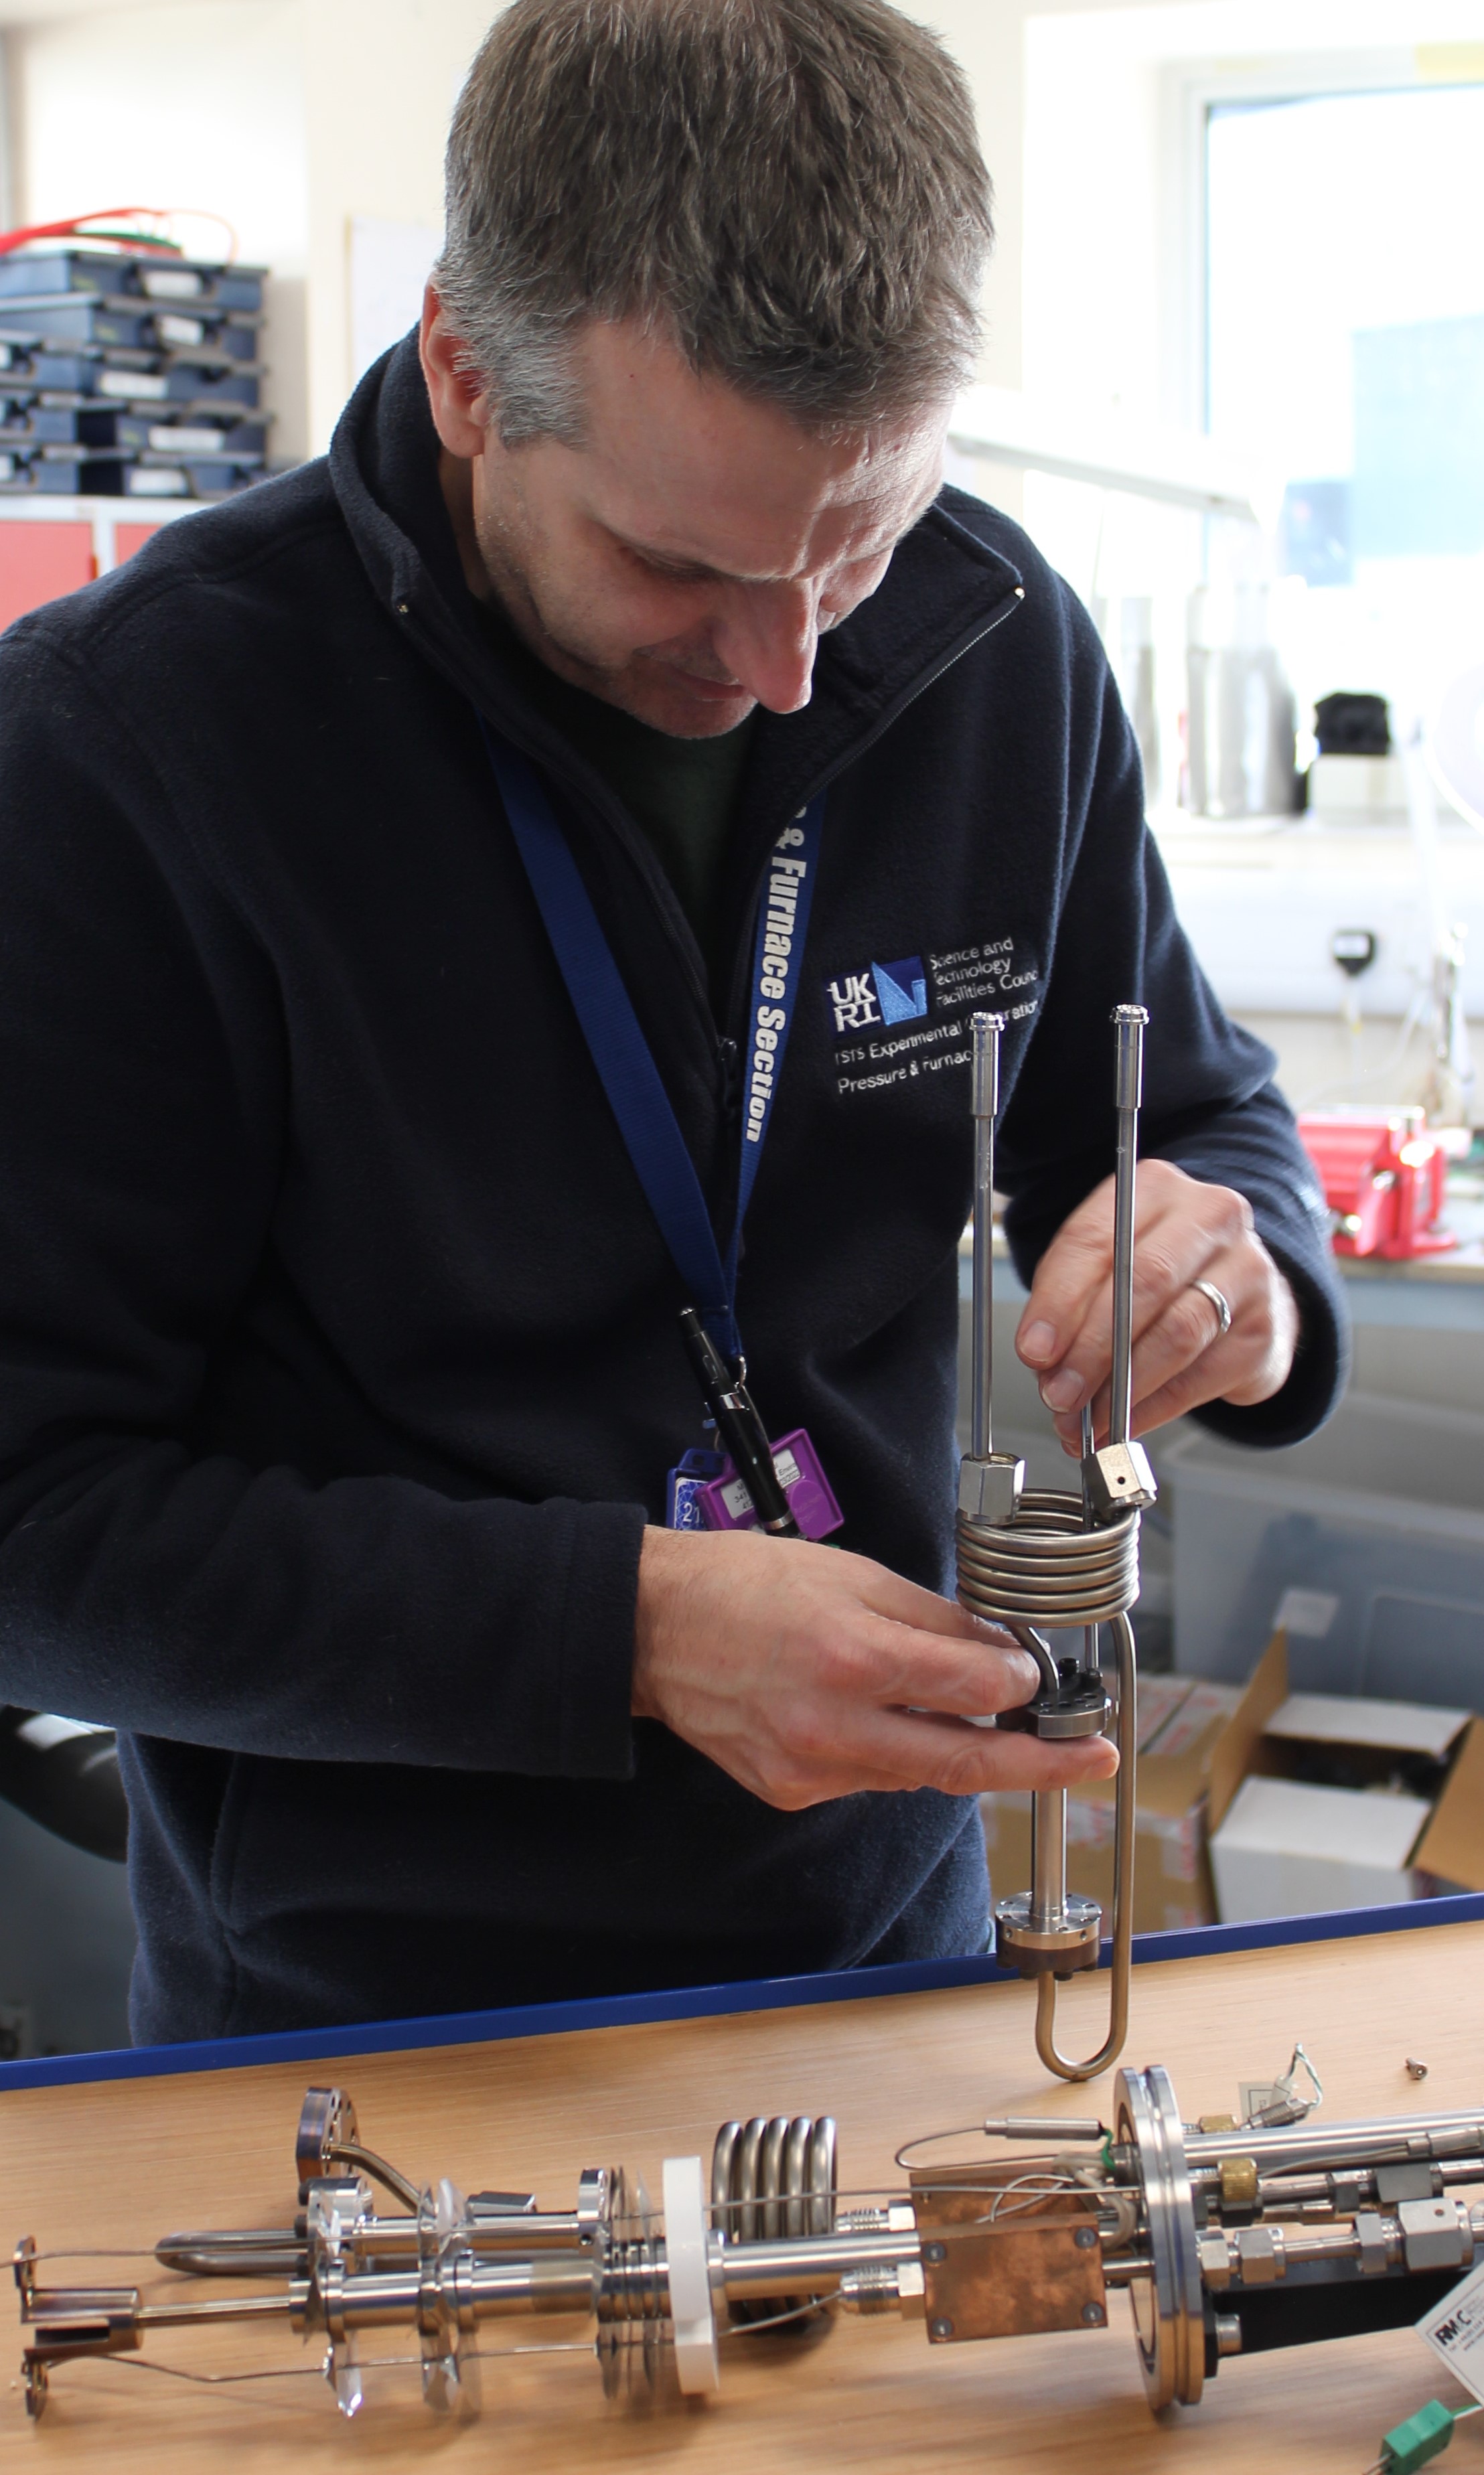 A member of the pressure and furnace section assembling a sample stick for pressure testing